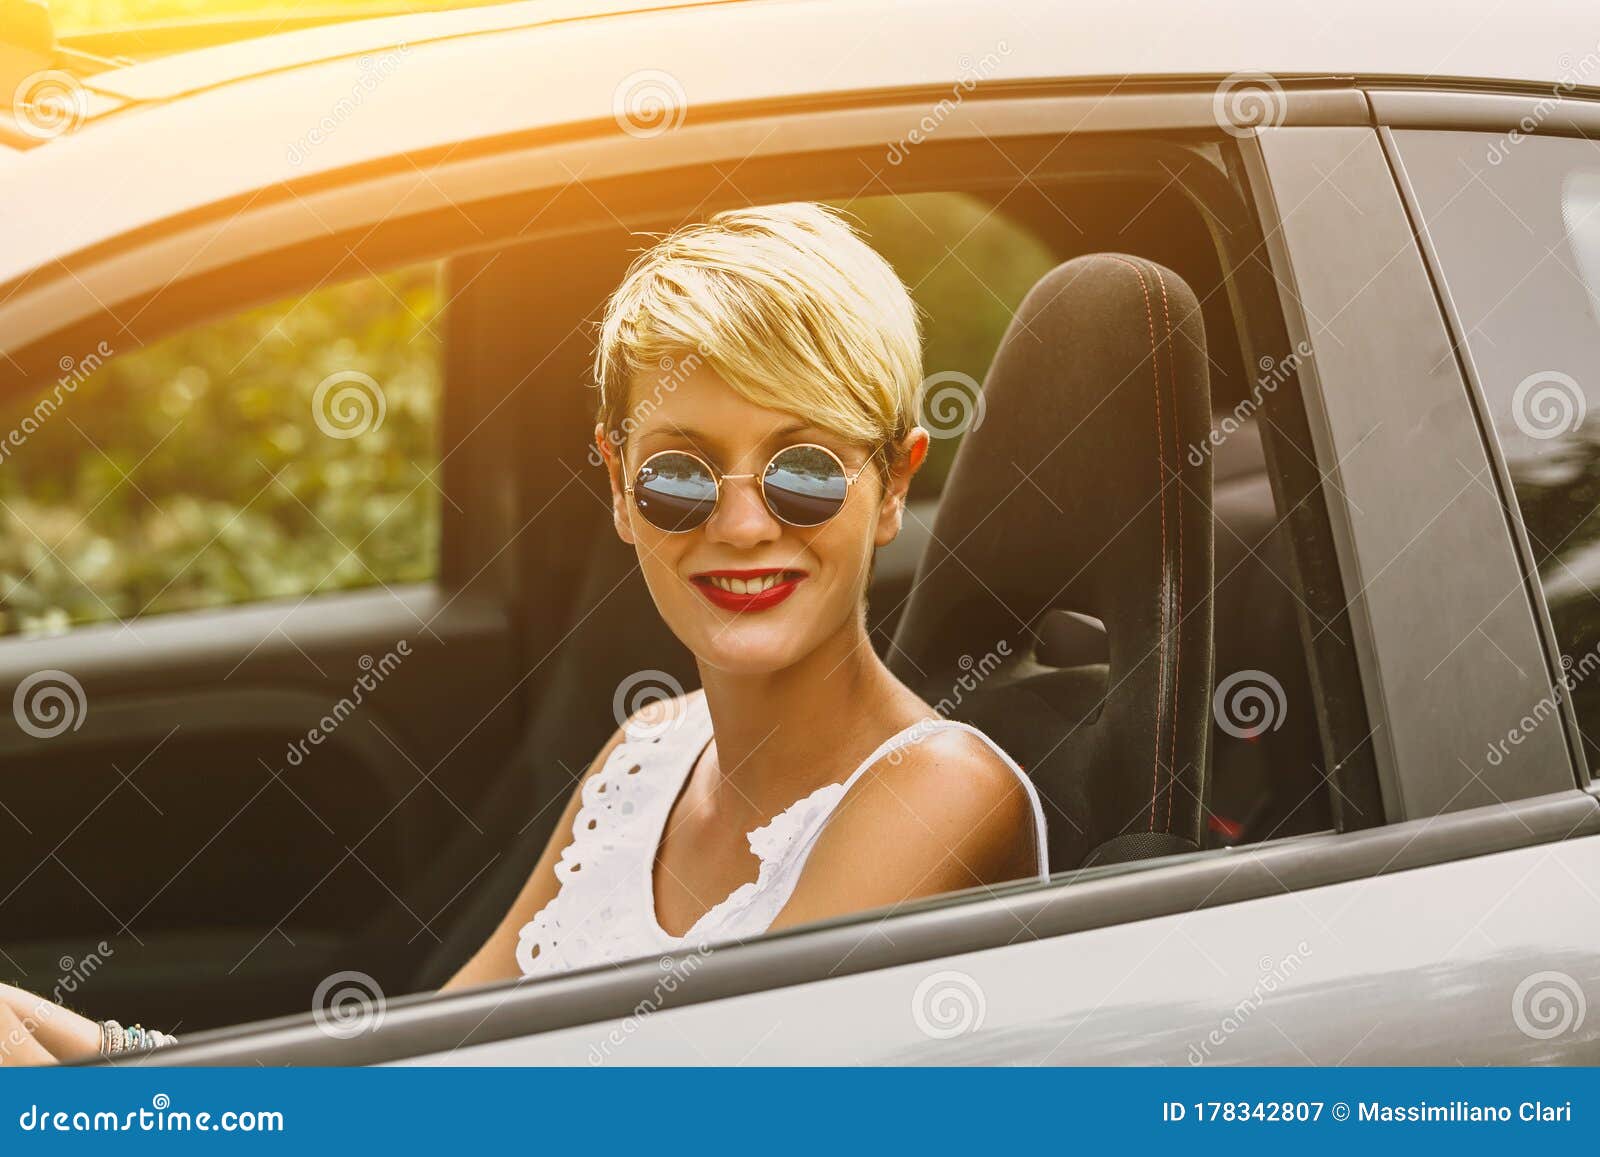 Young Blonde Attractive Woman Smiling And Looking Straight While